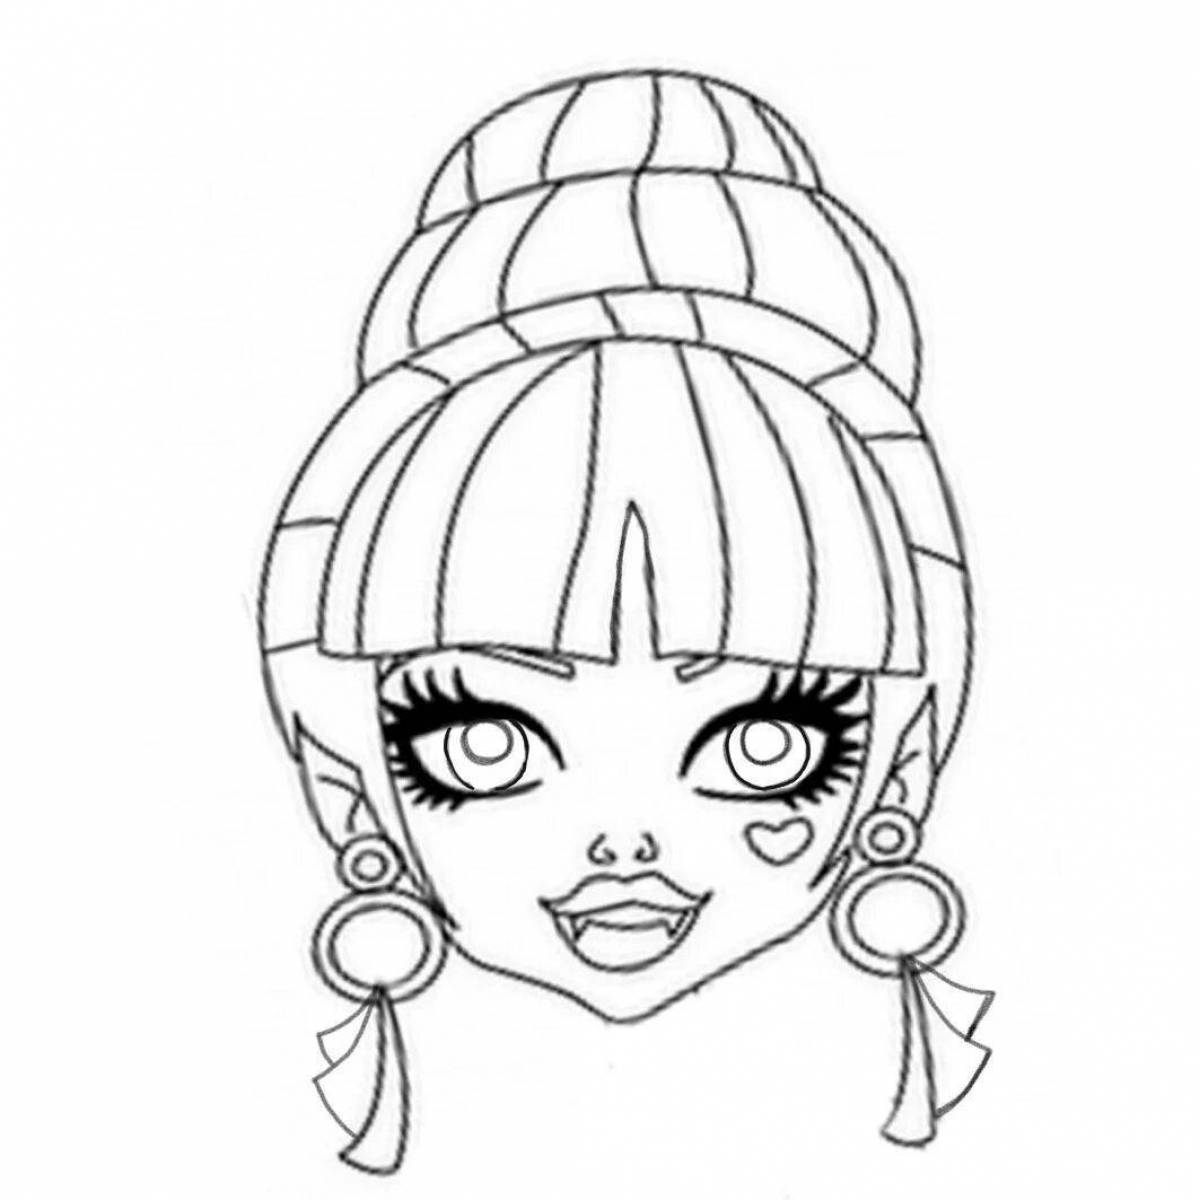 Coloring page dazzling makeup doll